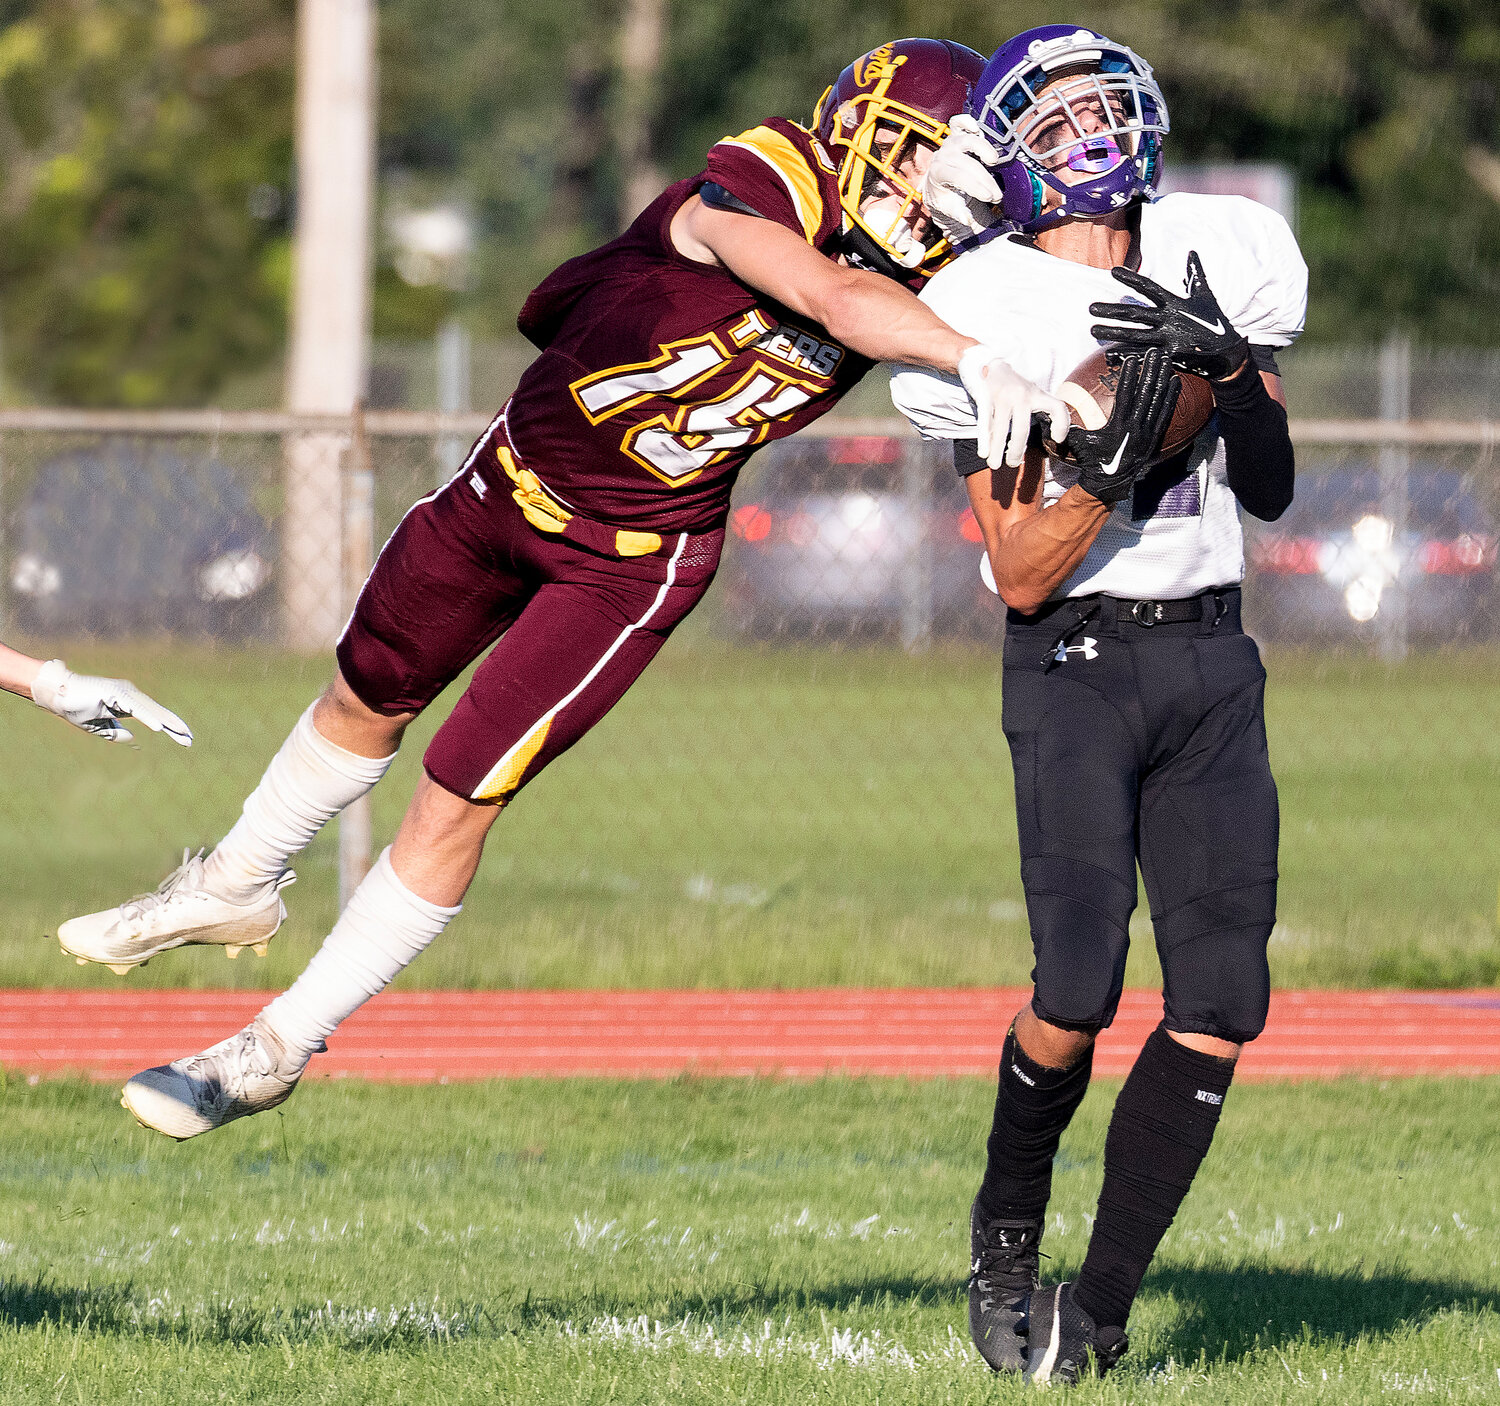 Huskies defensive back Lucas Andreozzi hauls in a Ben Troia pass for an interception in the second quarter.